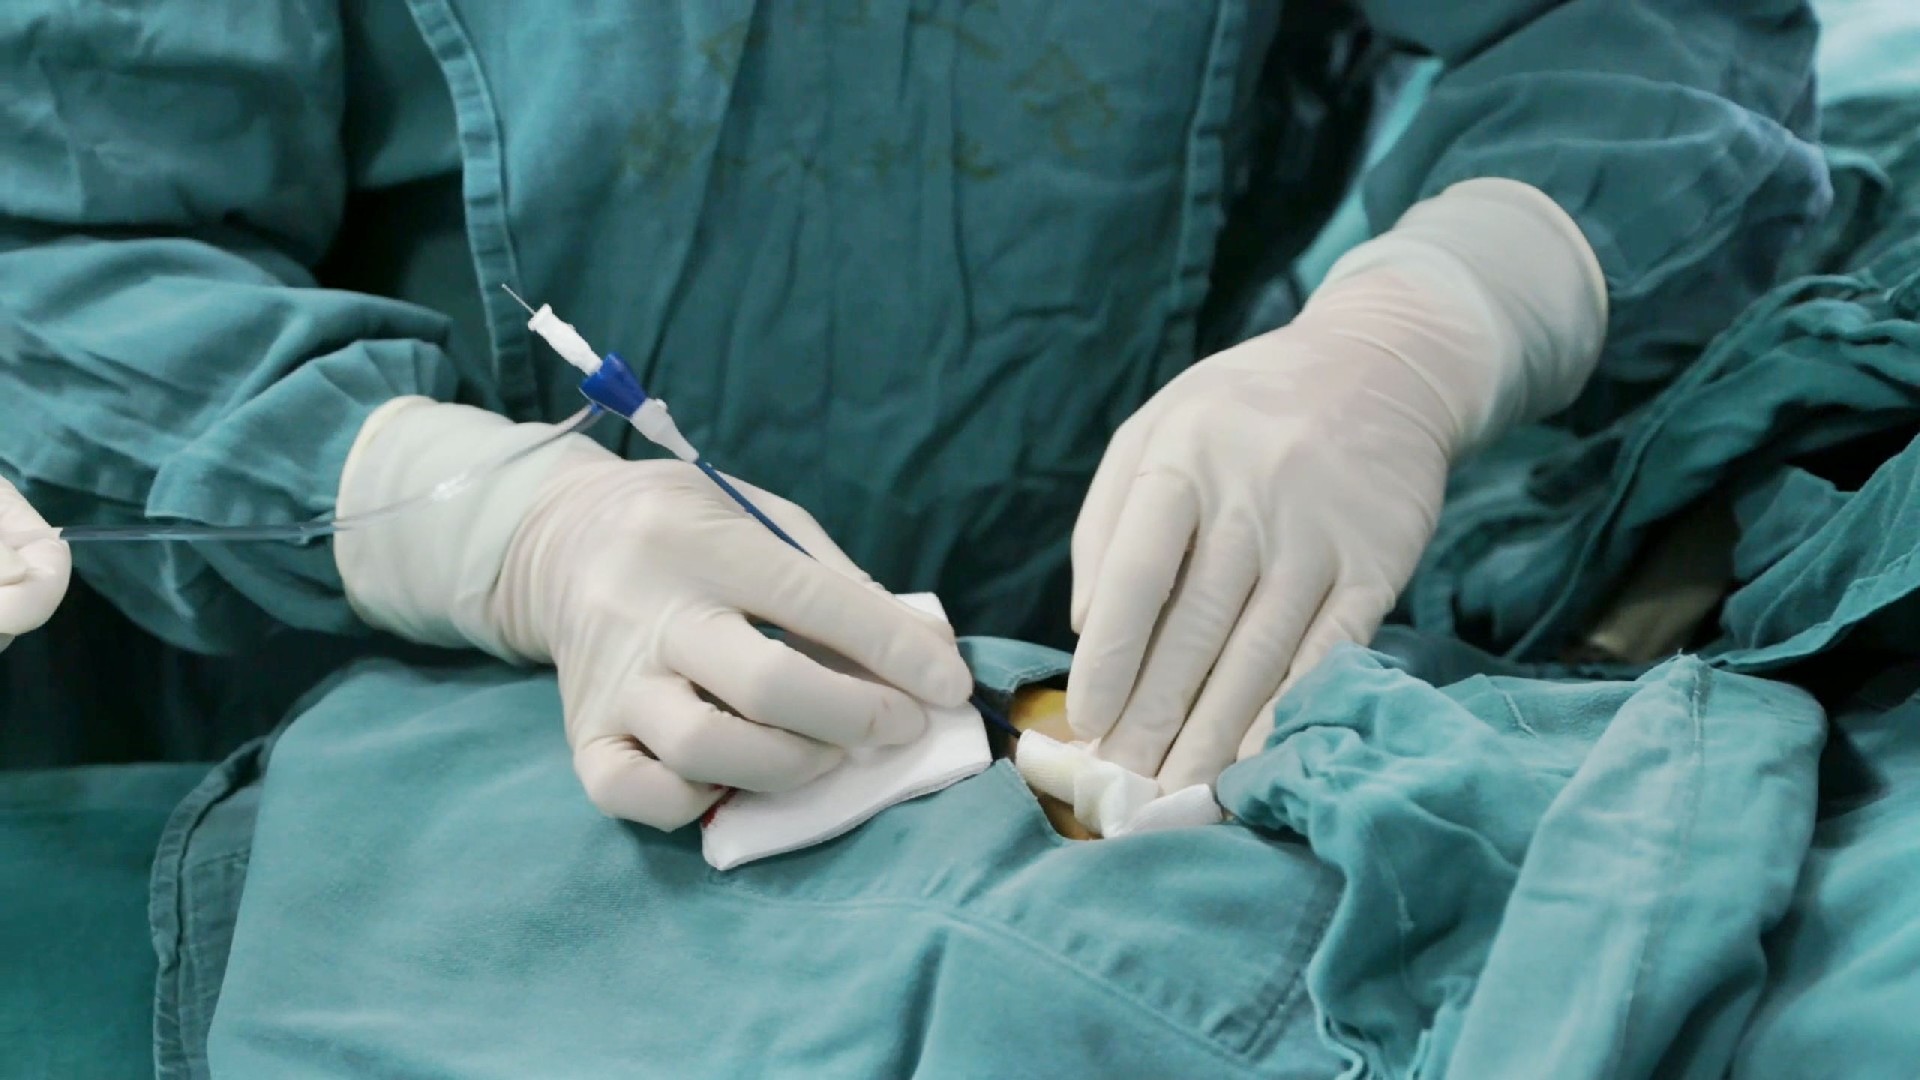 Interventional procedure for Liver Cell Cancer via radial artery approach